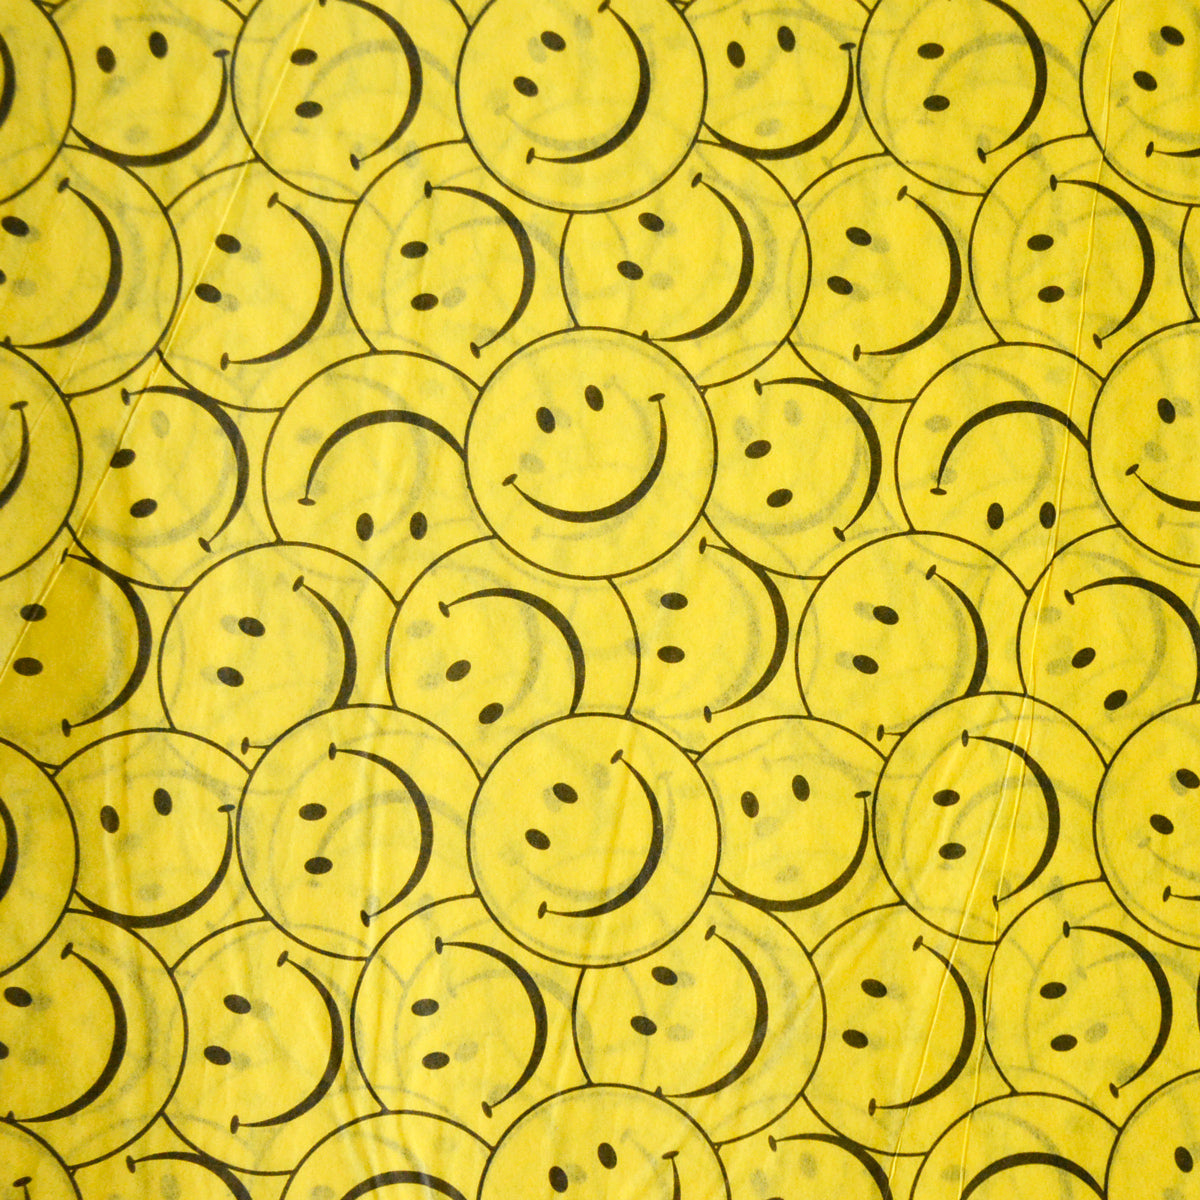 Groovy Smiley Face Tissue Paper - Groovy Themed Gift Wrapping Paper, Bright Yellow Smiley Faces Pattern, Handcraft Supplies